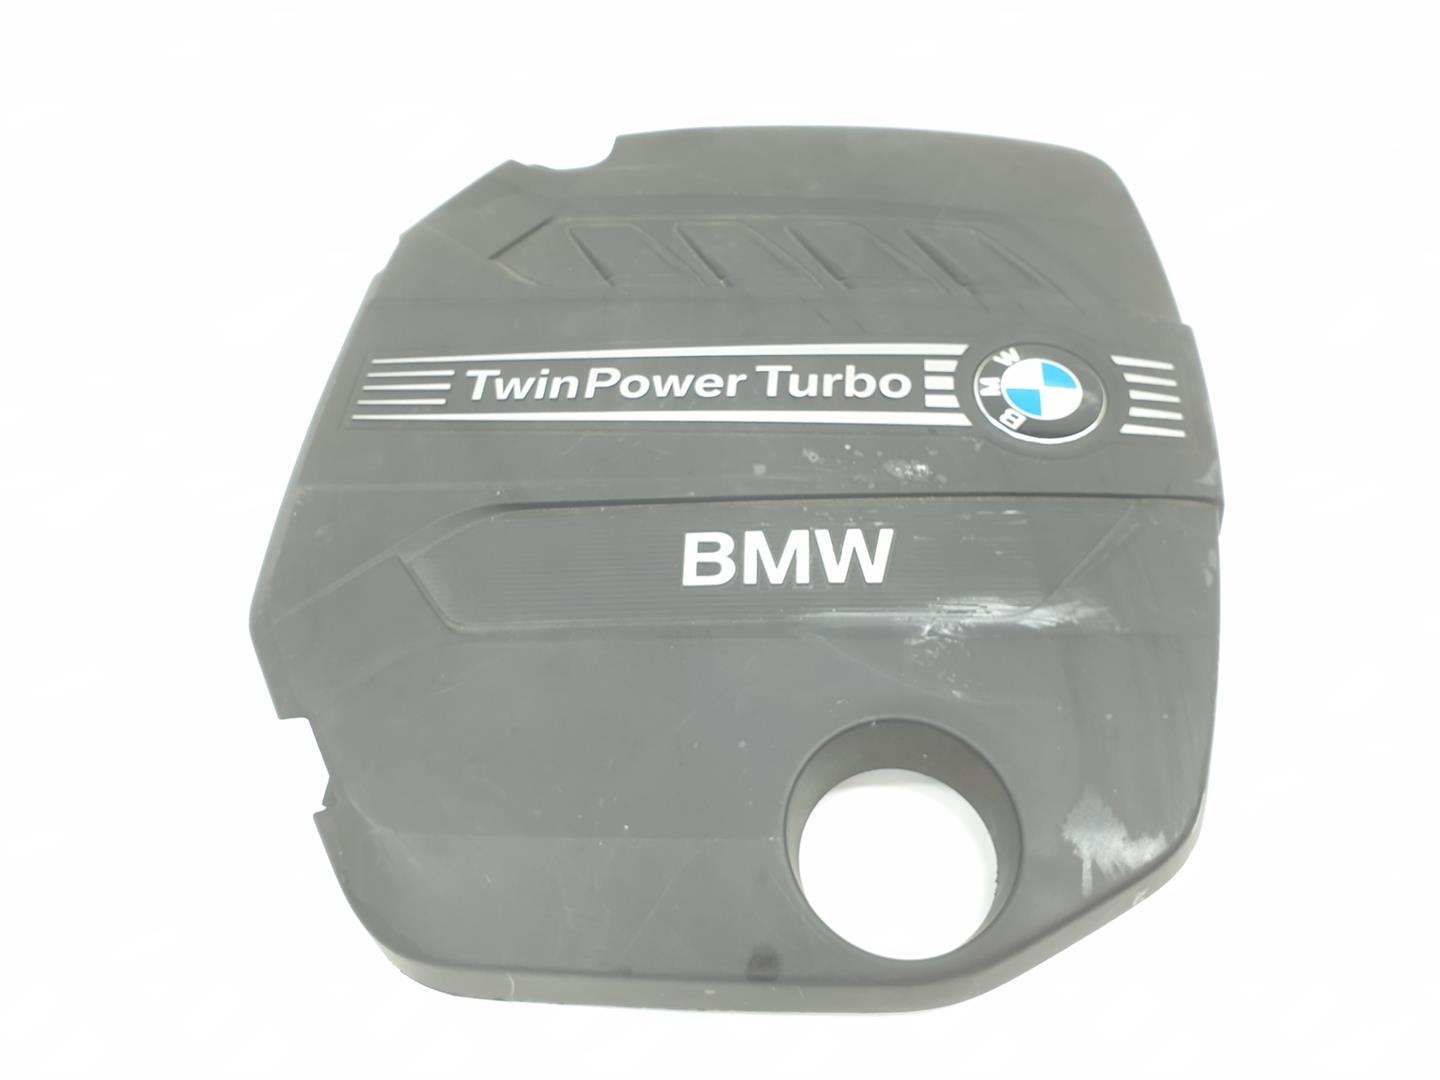 BMW 1 Series F20/F21 (2011-2020) Engine Cover 11147810802, 11147810802 19898731